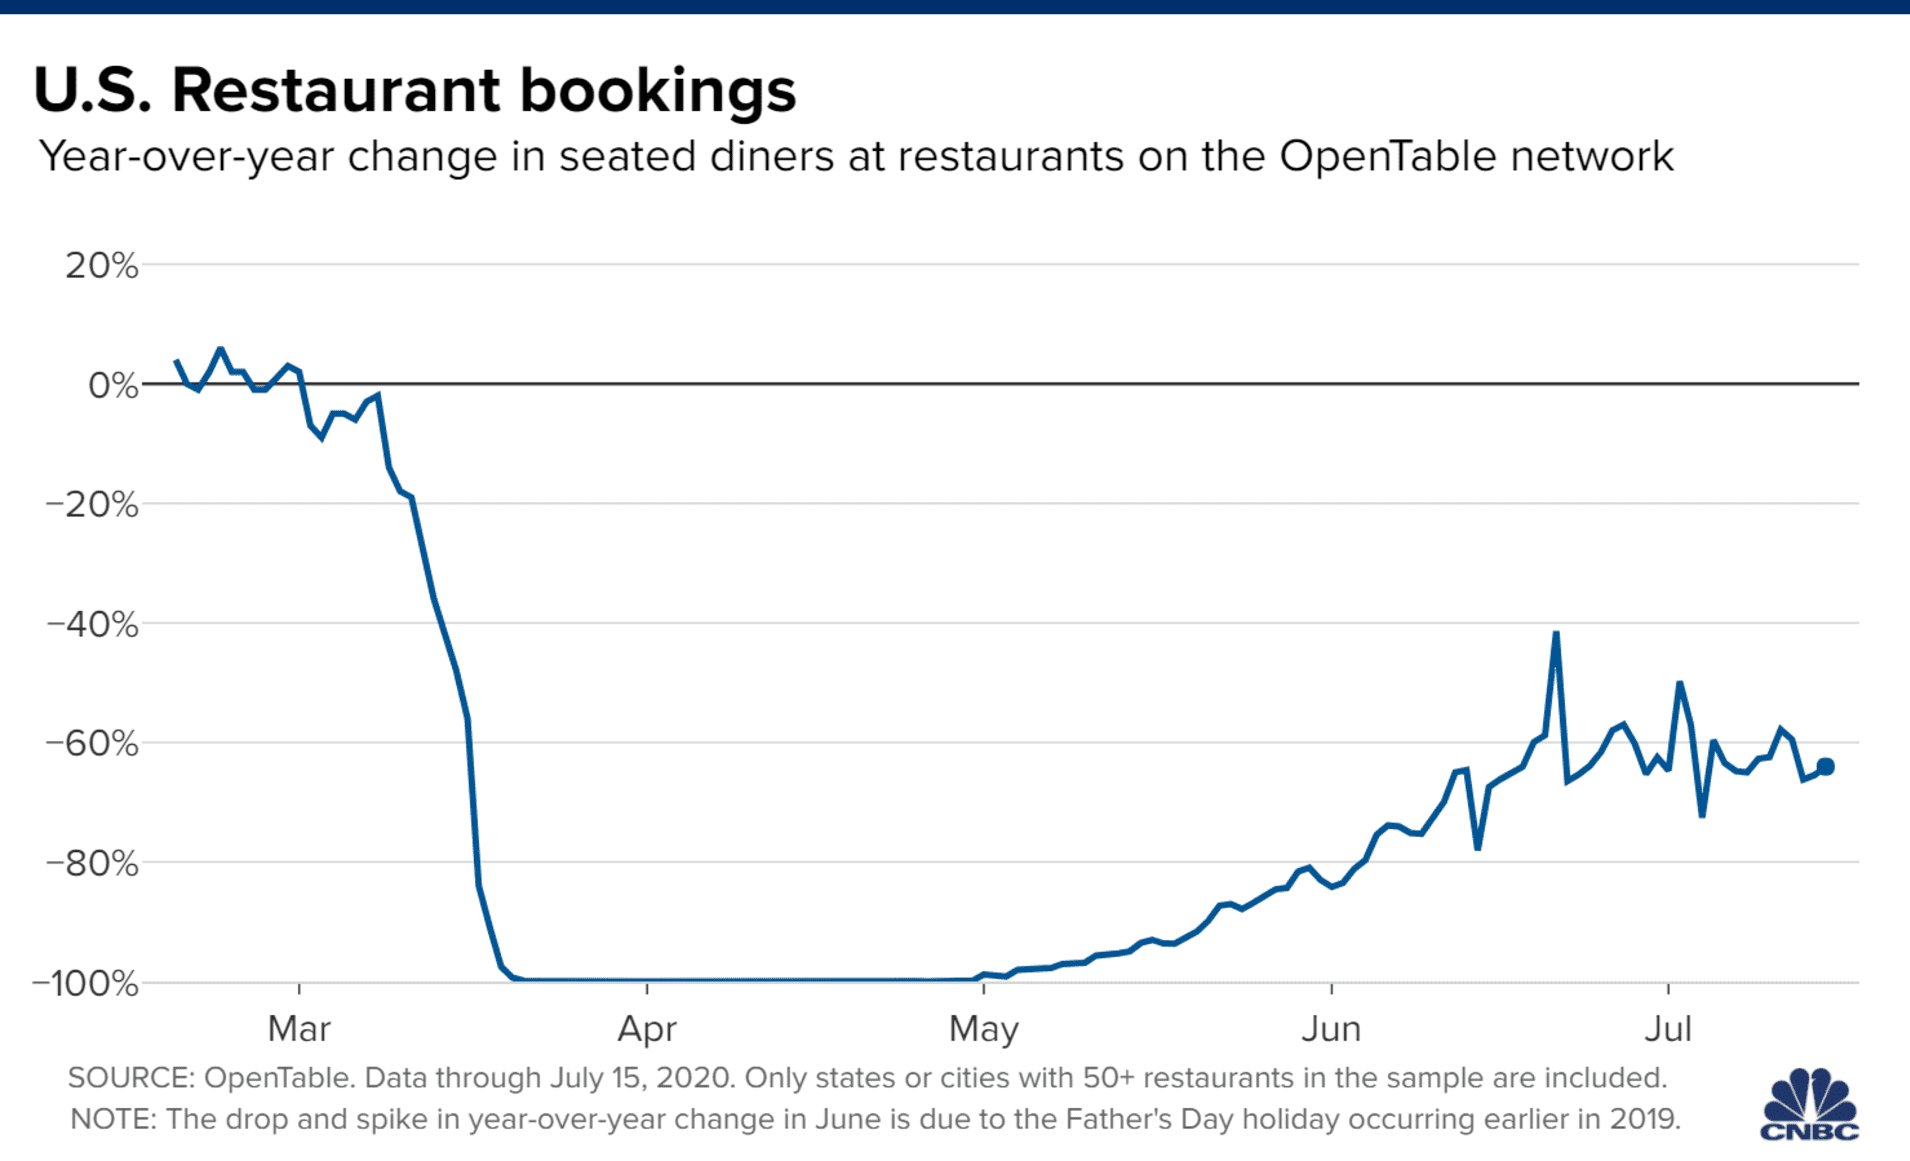 Chart of the year-over-year change in seated diners at restaurants on the OpenTable network, with data through July 15, 2020.